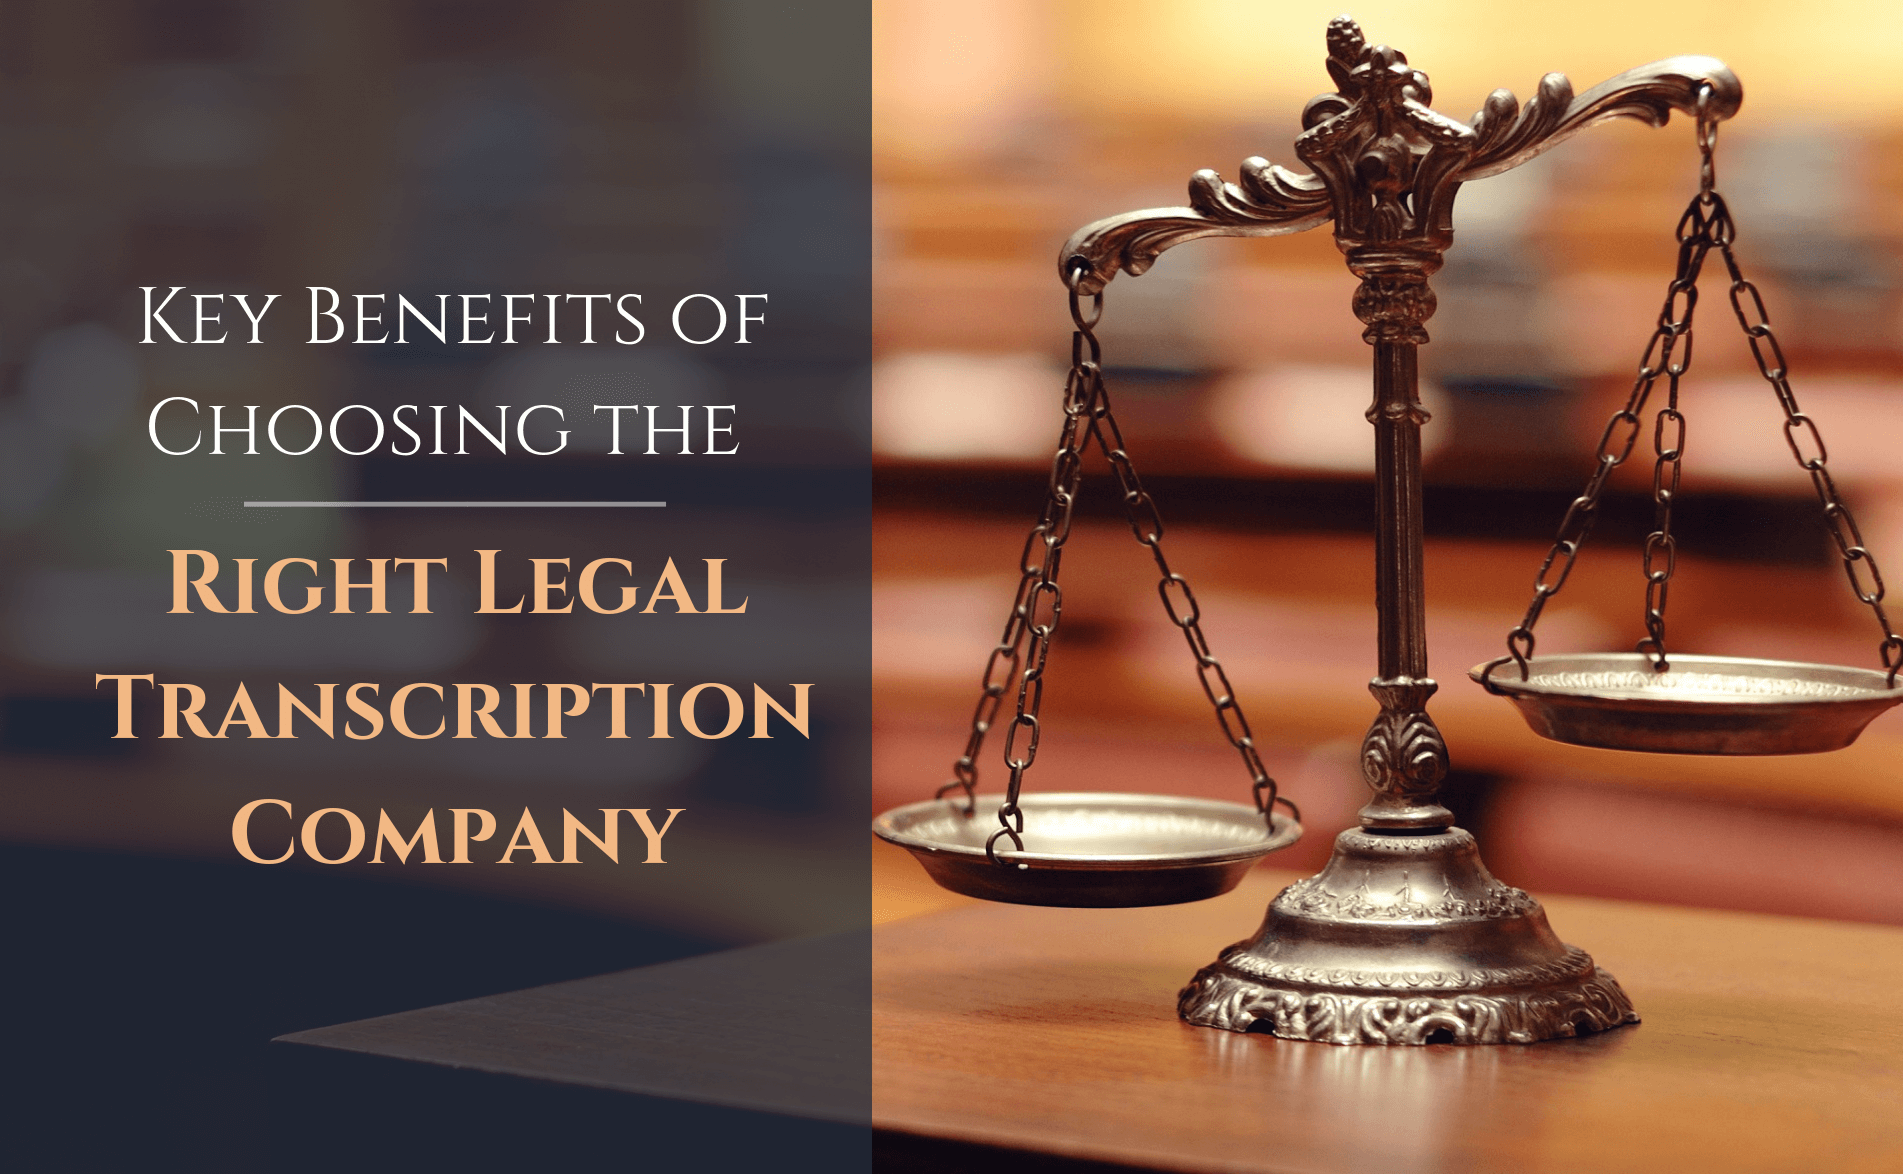 Filler Words in Legal Transcription: Why They Should be Included